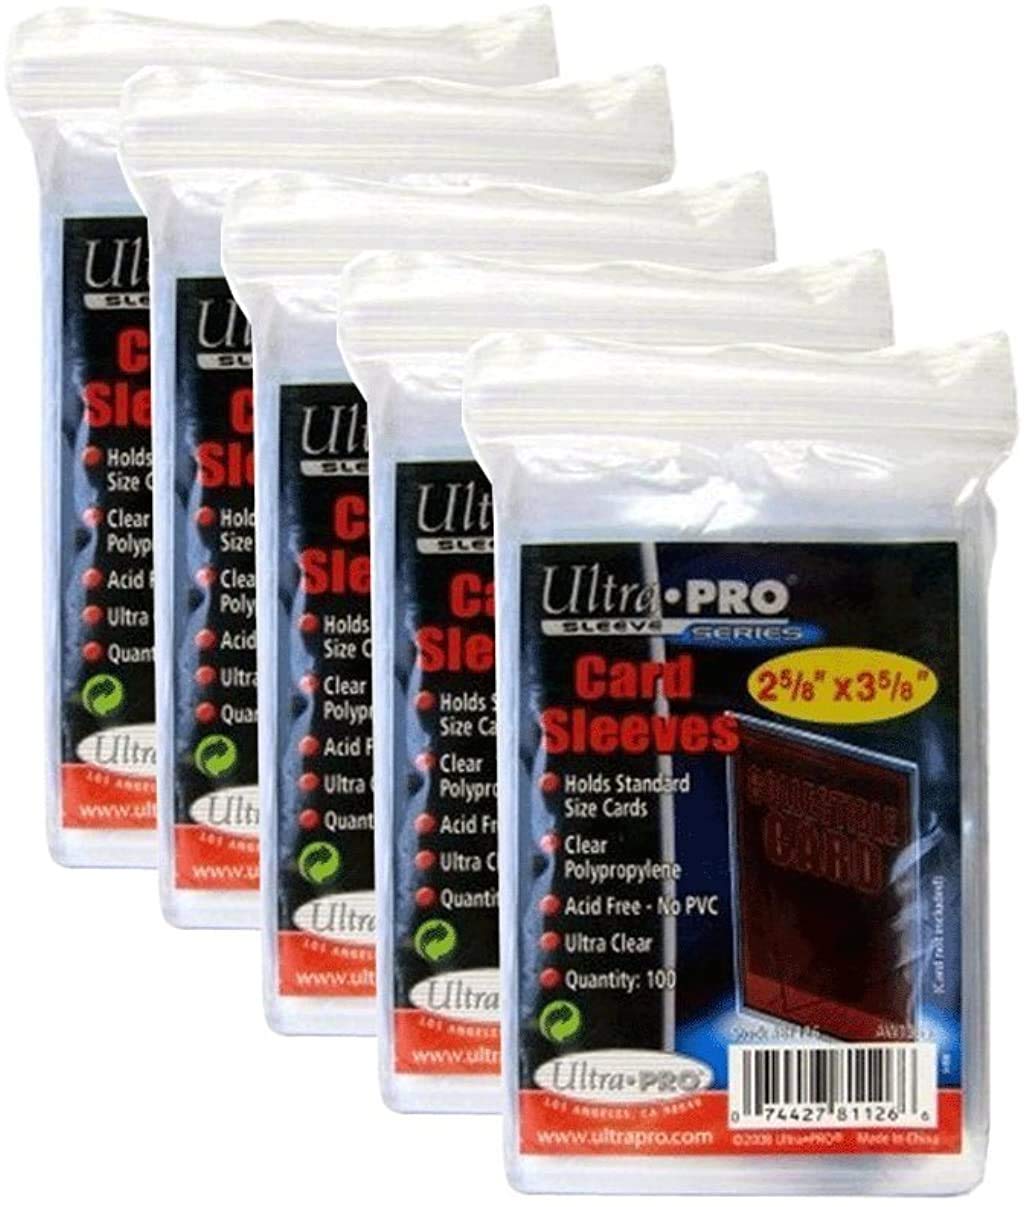 Ultra Pro Set of 5 X 100 Soft Sleeves / Penny Sleeves for Pokemon, Magic, and Standard-Sized Sports and Trading Cards No PVC